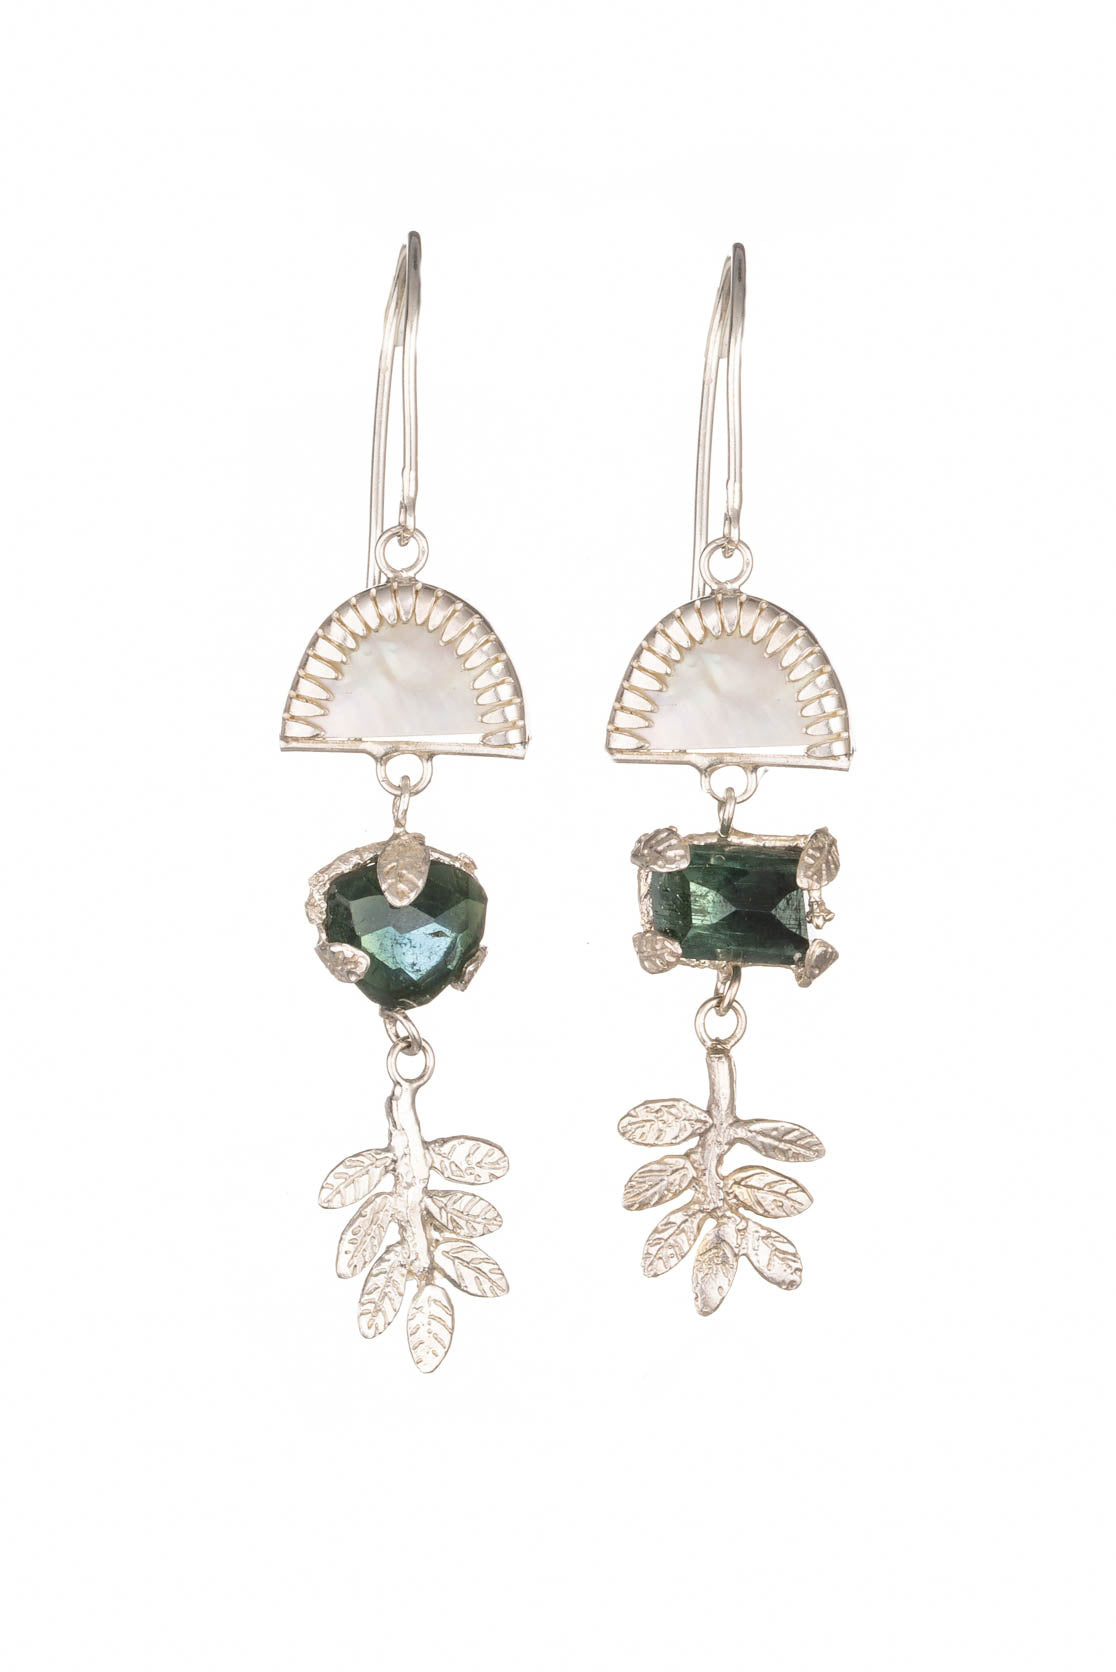 Botanical Drop Earrings - dark green tourmaline and mother of pearl